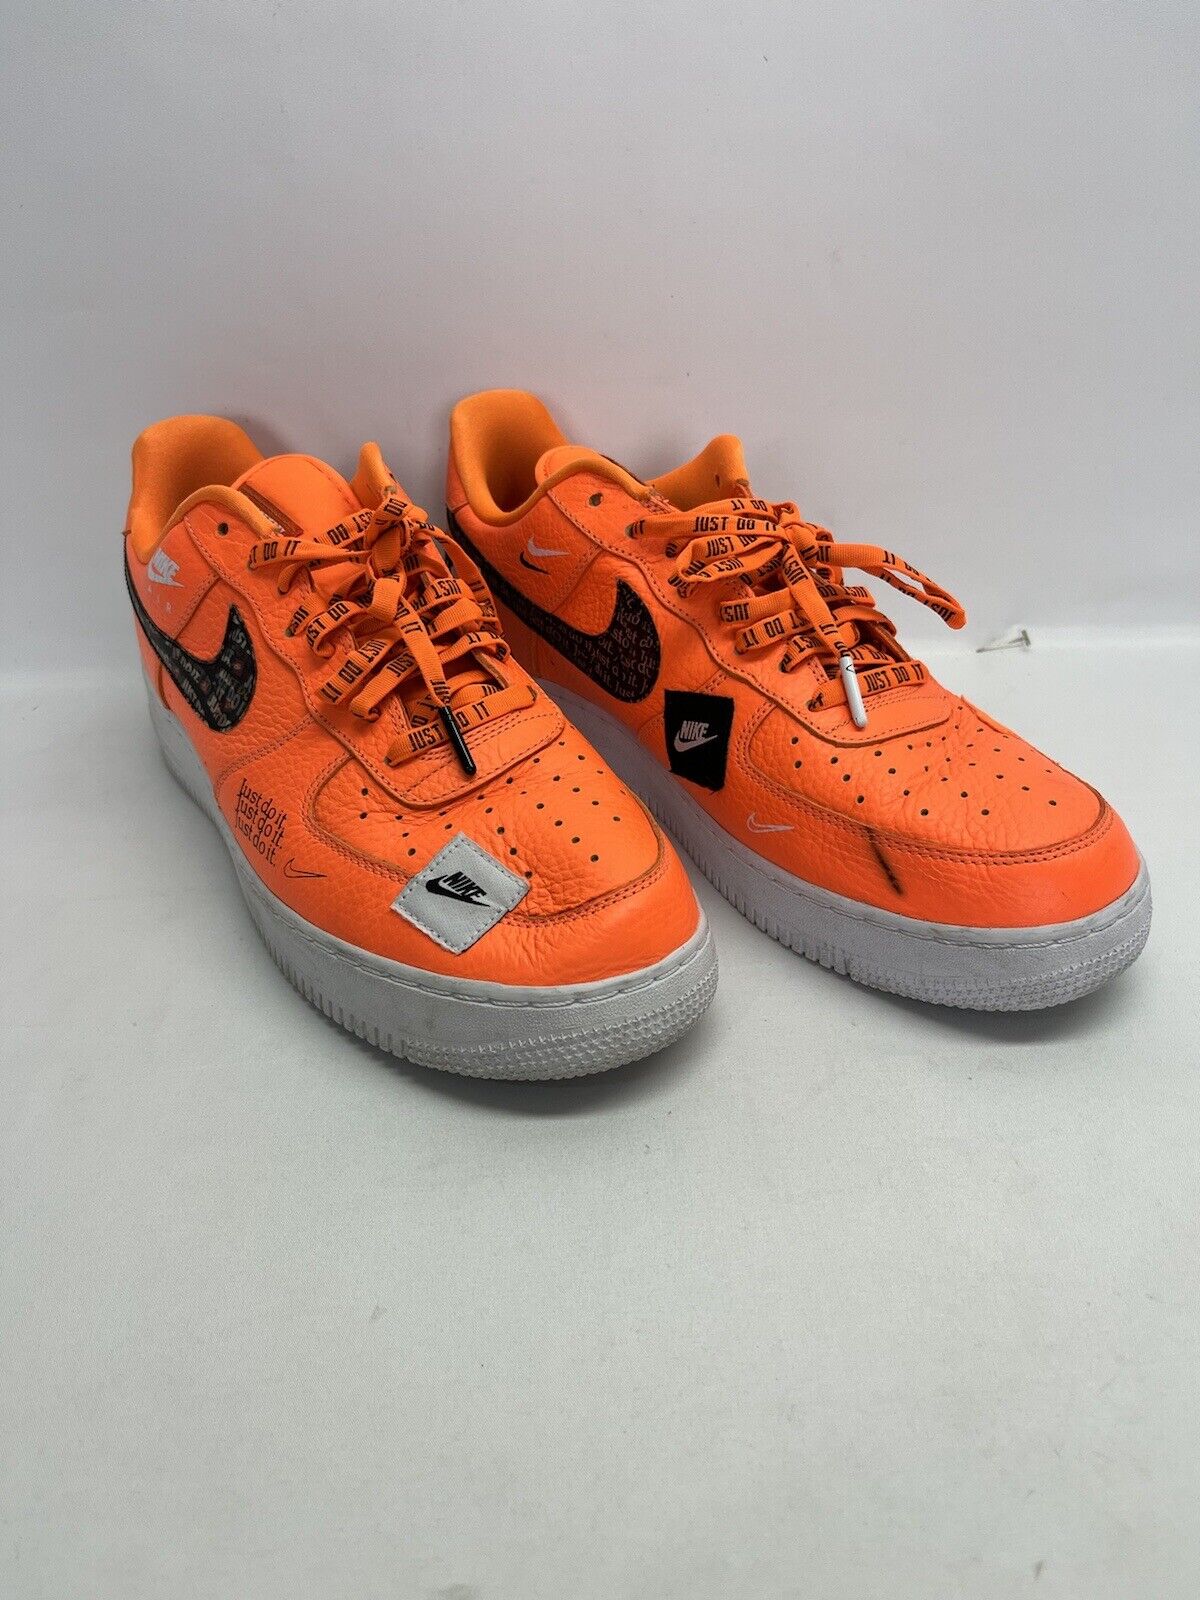 Abolished Melodrama Surroundings Nike Air Force 1 Low Just Do It Pack Total Orange - Size 12 ( AR7719-800 )  | eBay